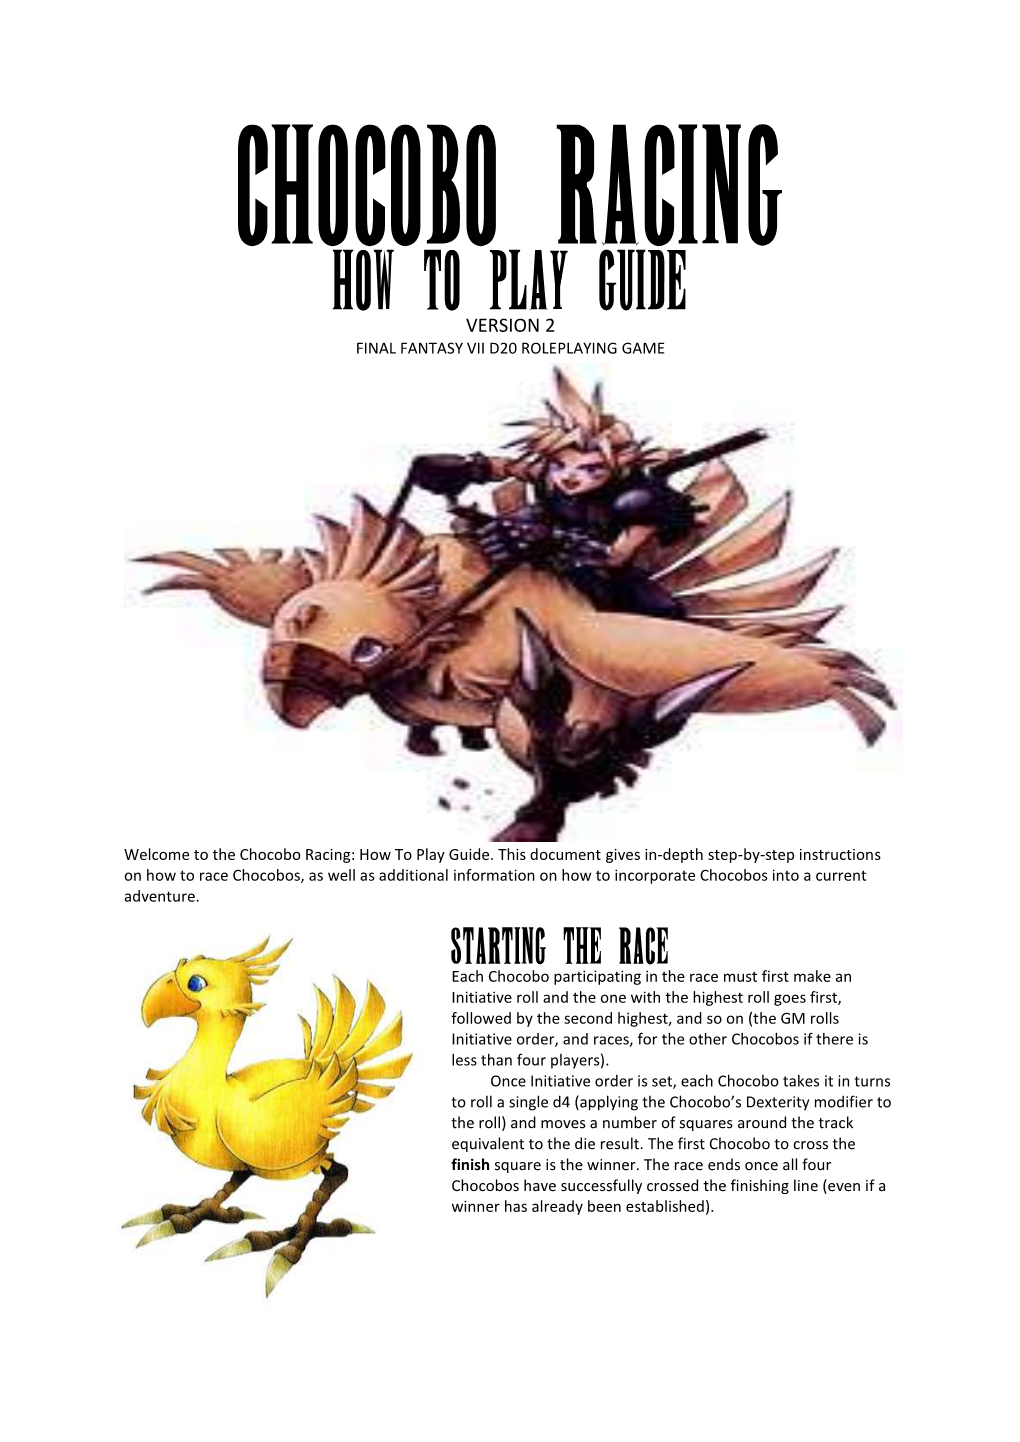 How to Play Guide Version 2 Final Fantasy Vii D20 Roleplaying Game